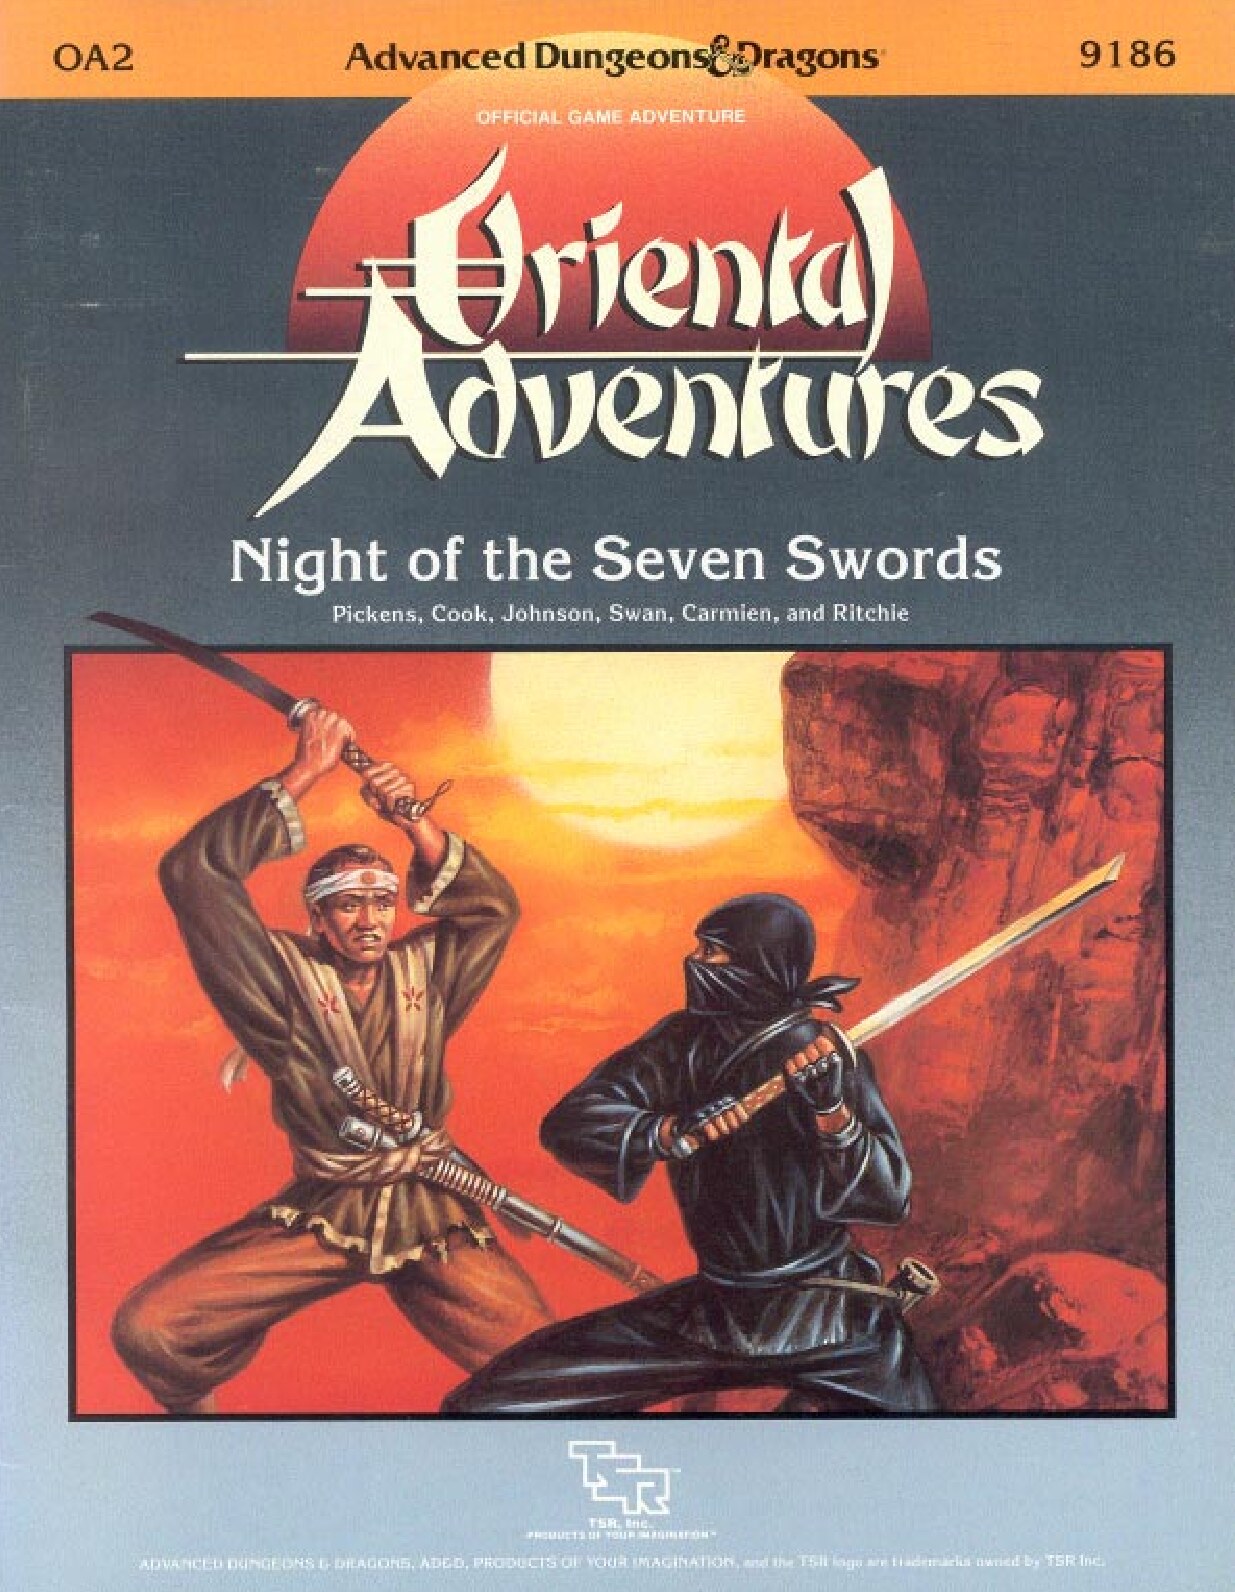 Night of the Seven Swords